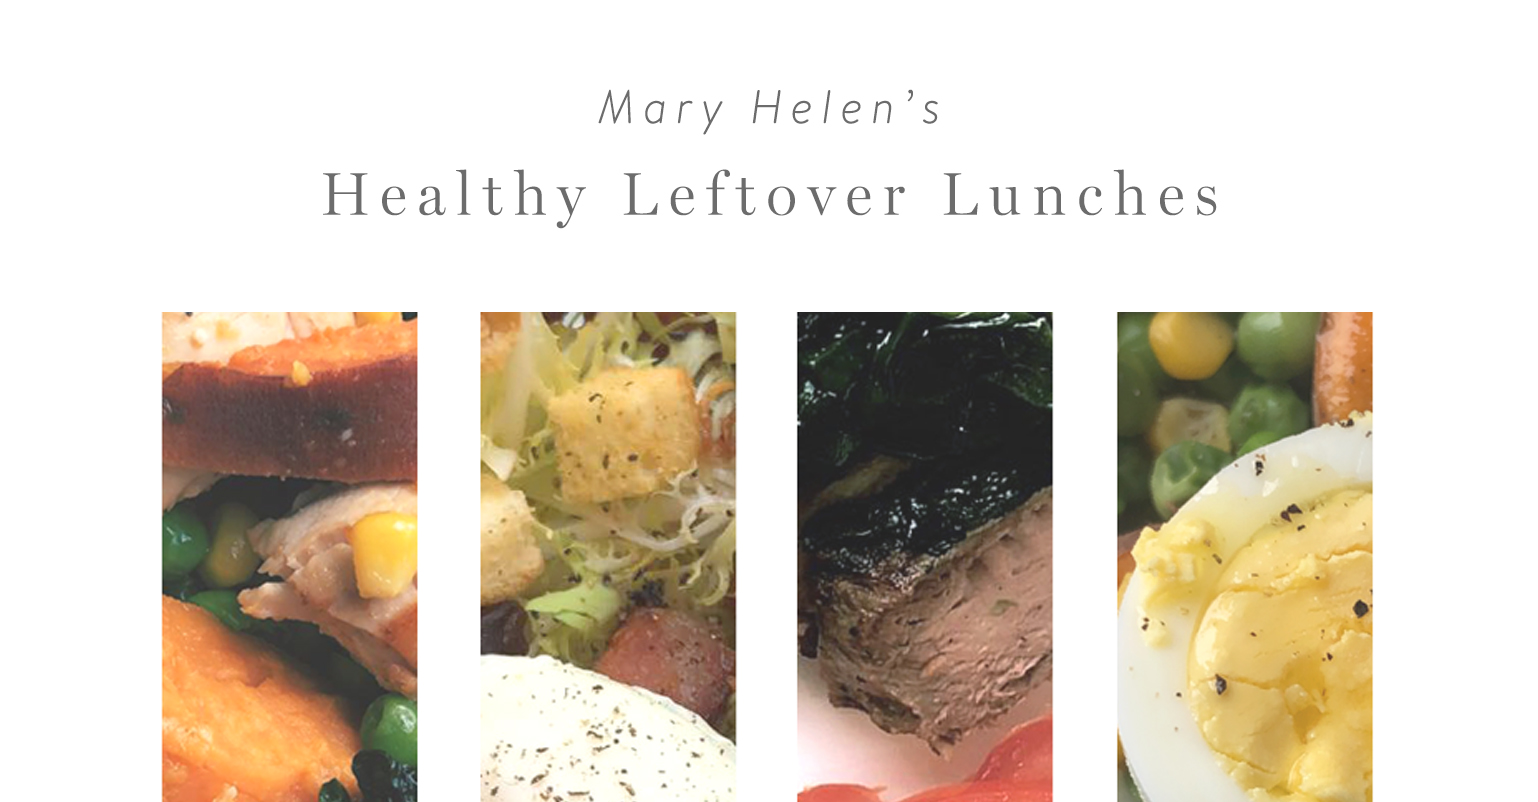 Mary Helen's Healthy Leftover Lunches!